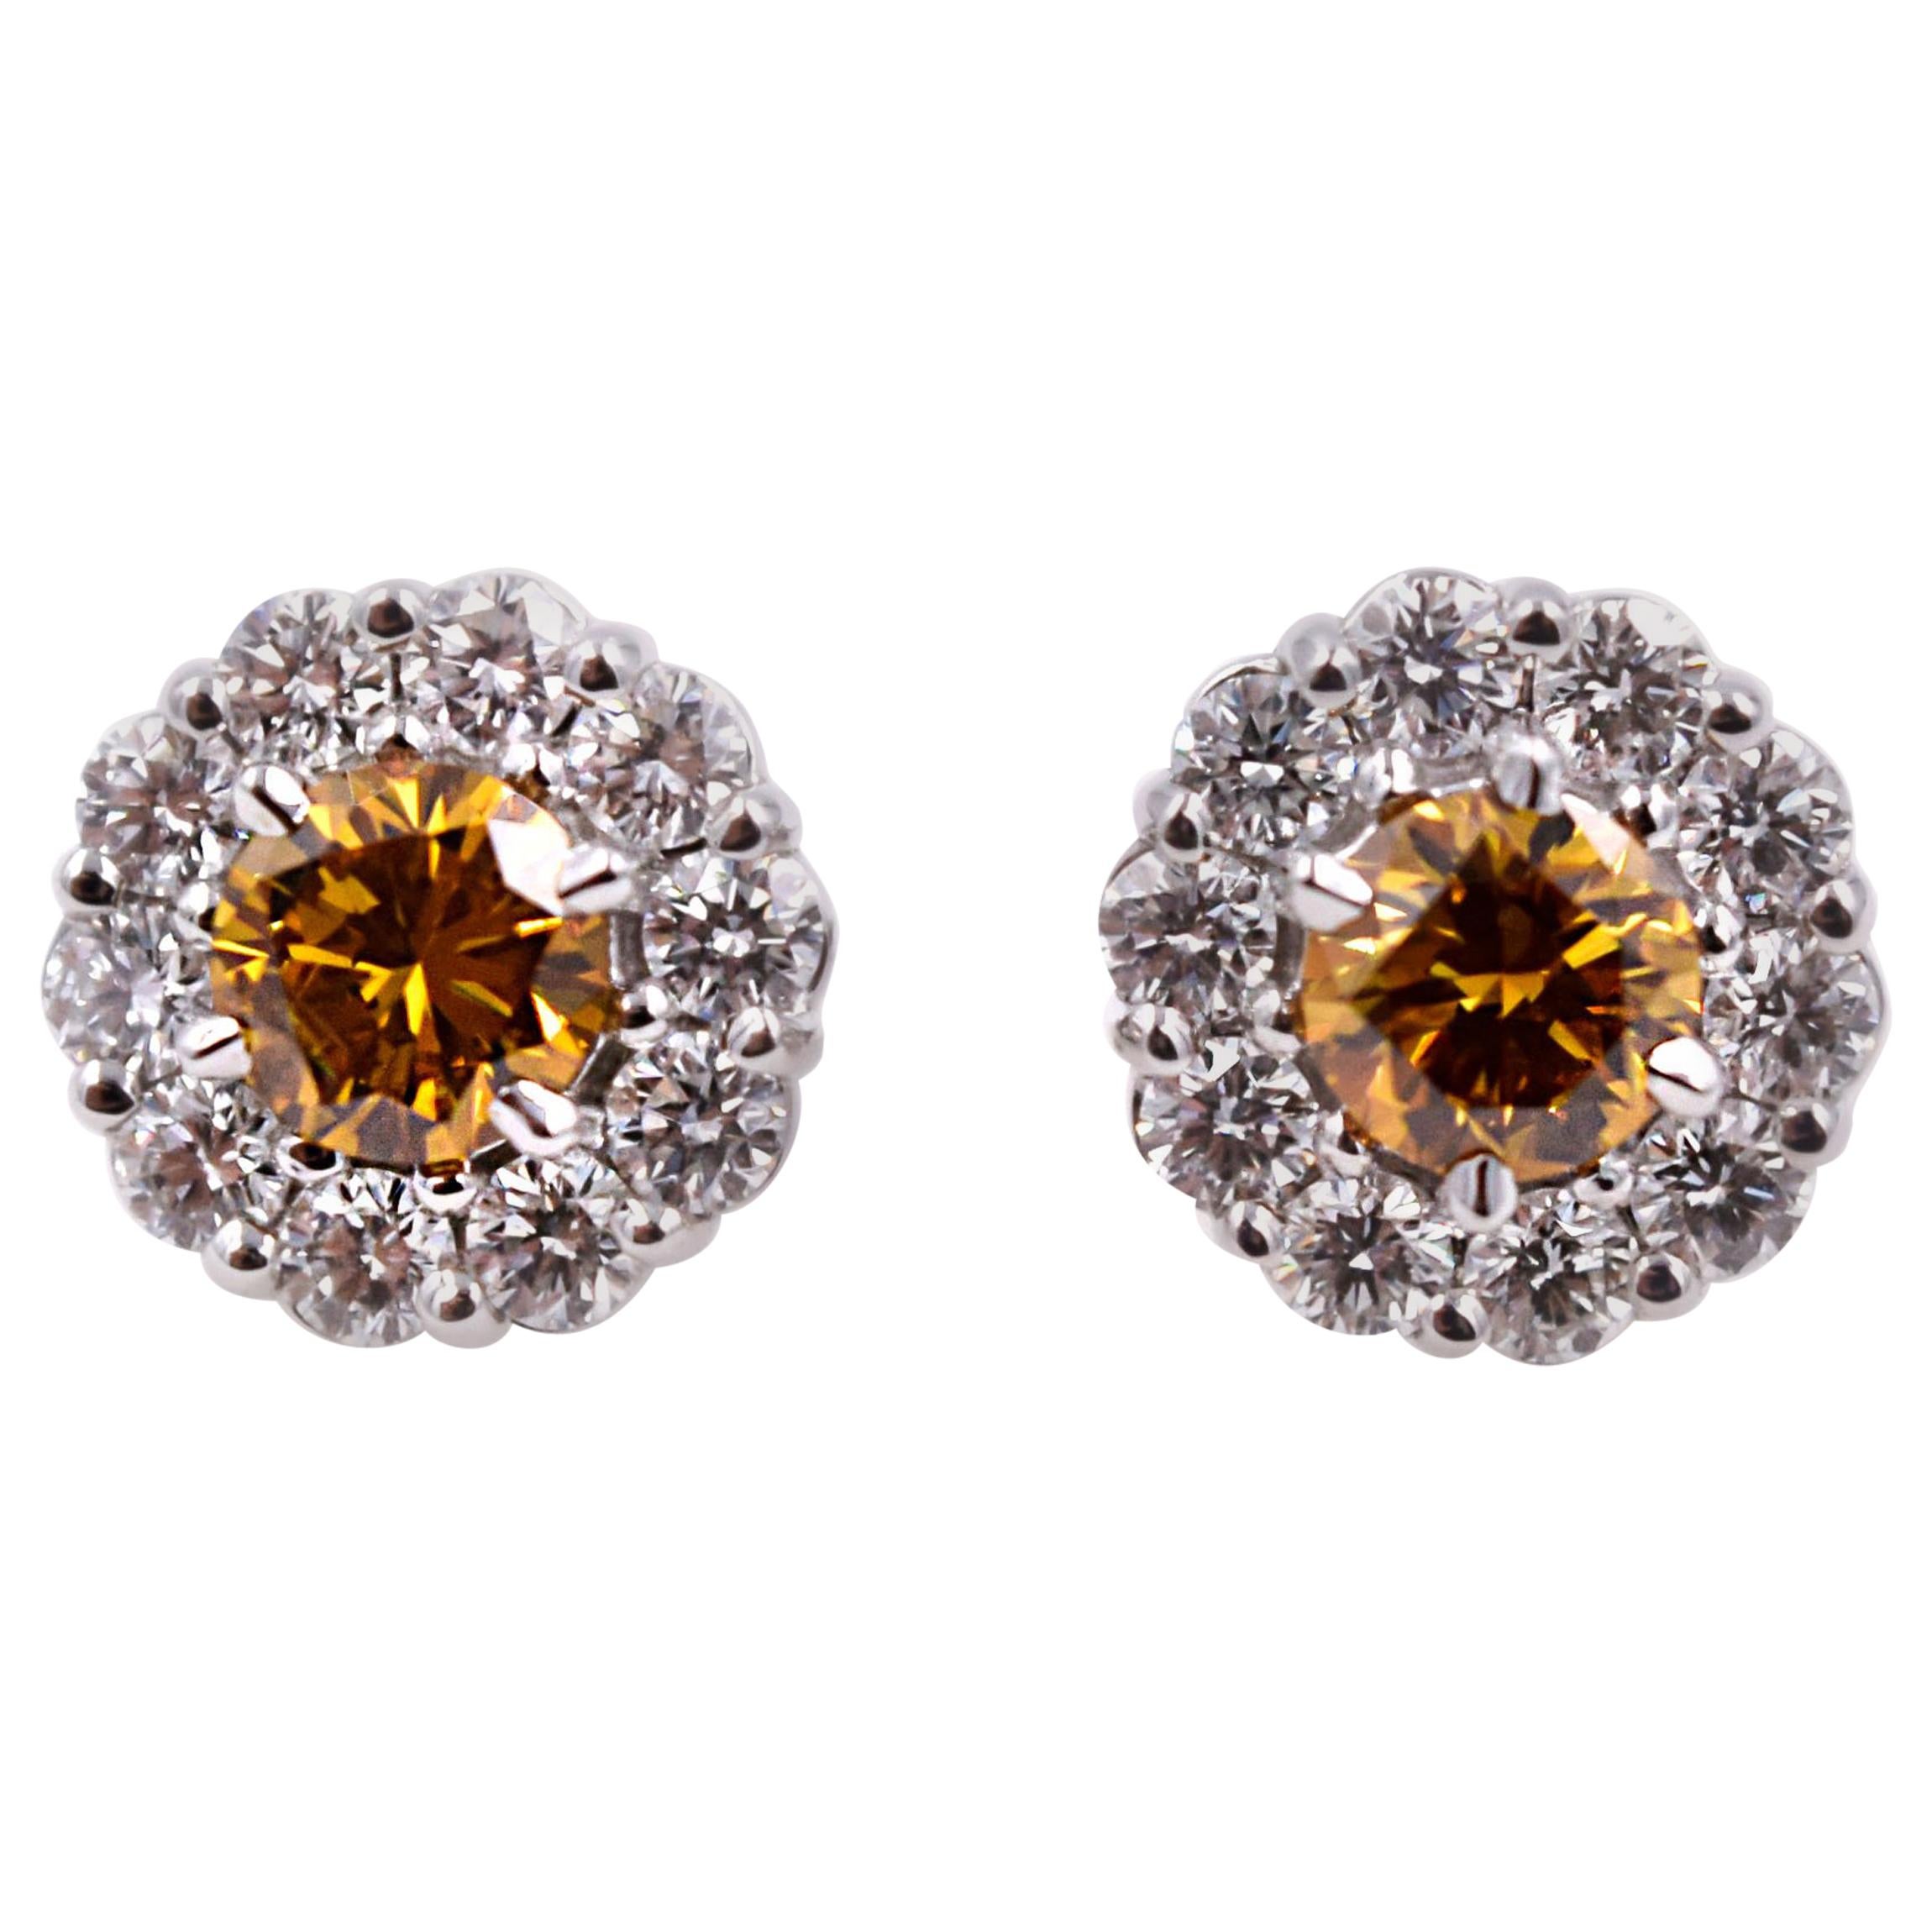 Novel Collection GIA Certified Orange Diamond Earring Studs in 18 Karat Gold For Sale